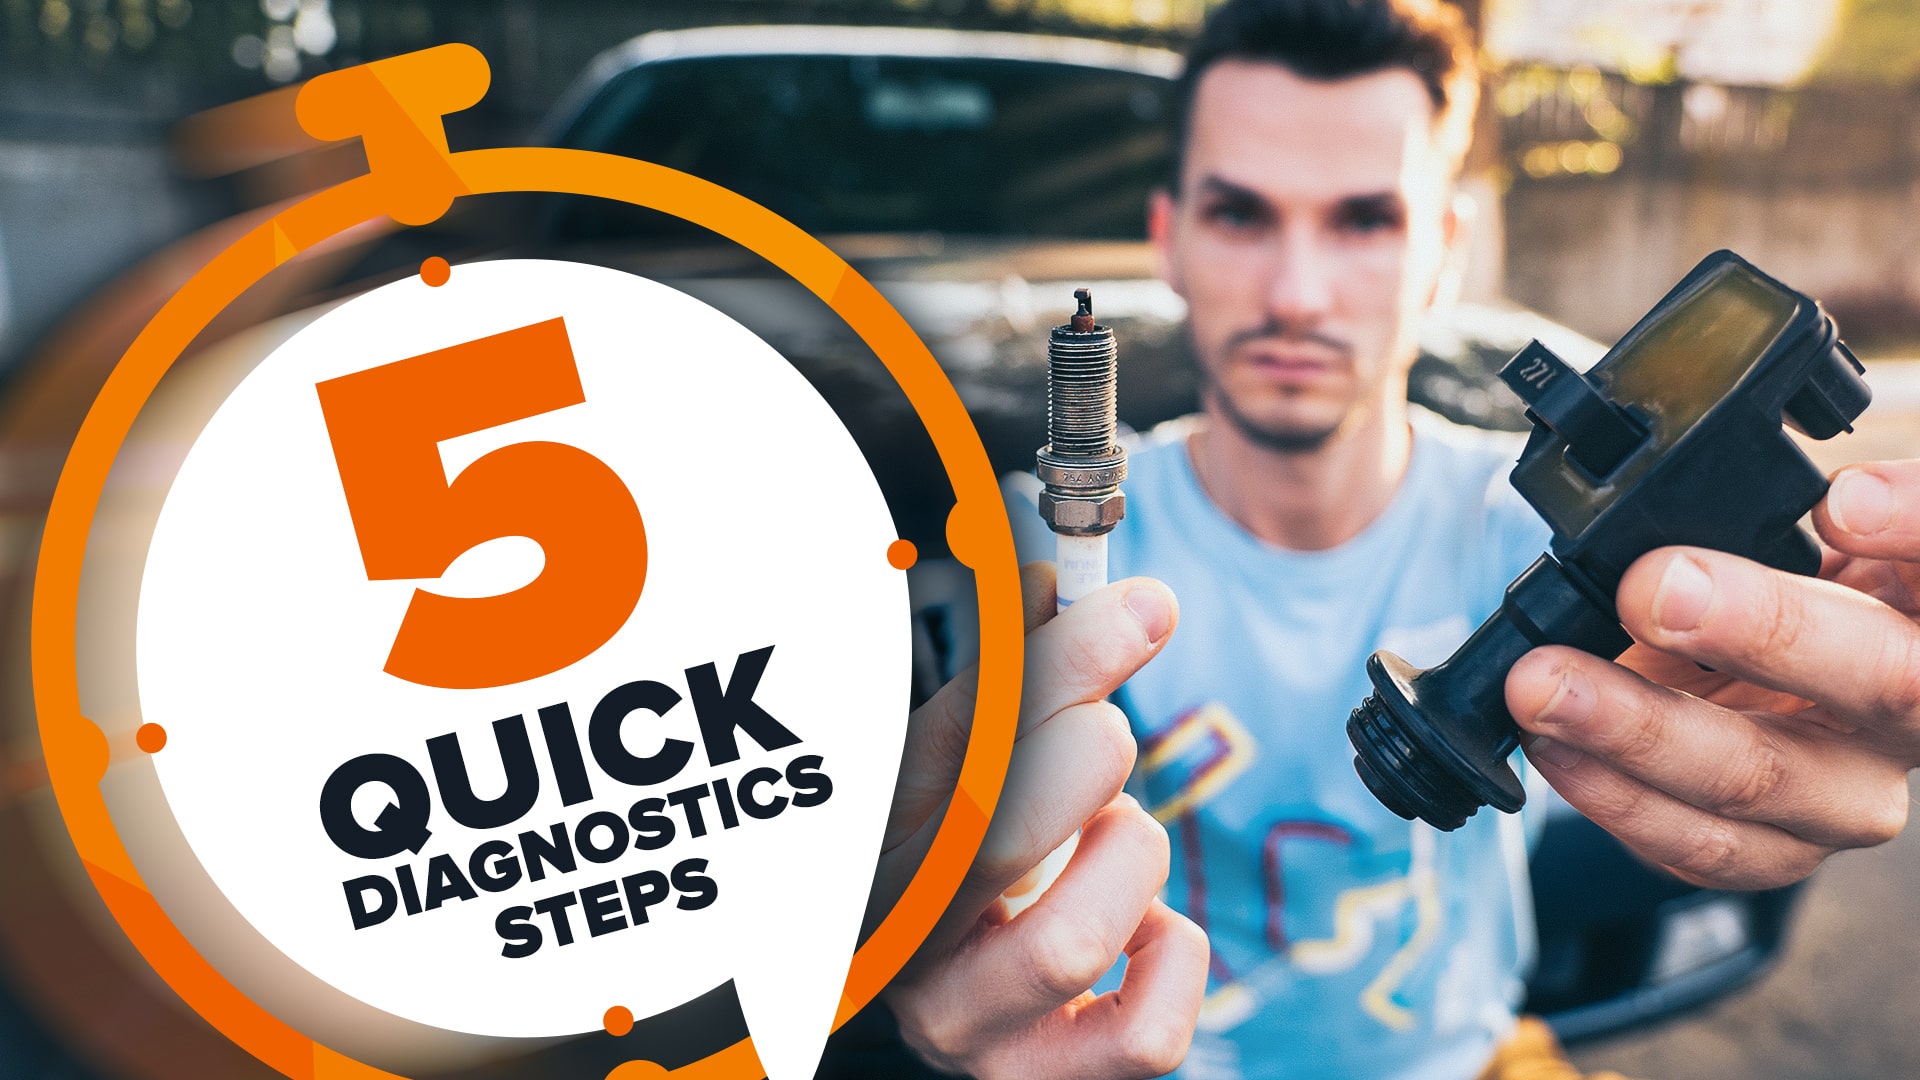 Signs of a faulty ignition system — How to inspect the ignition system